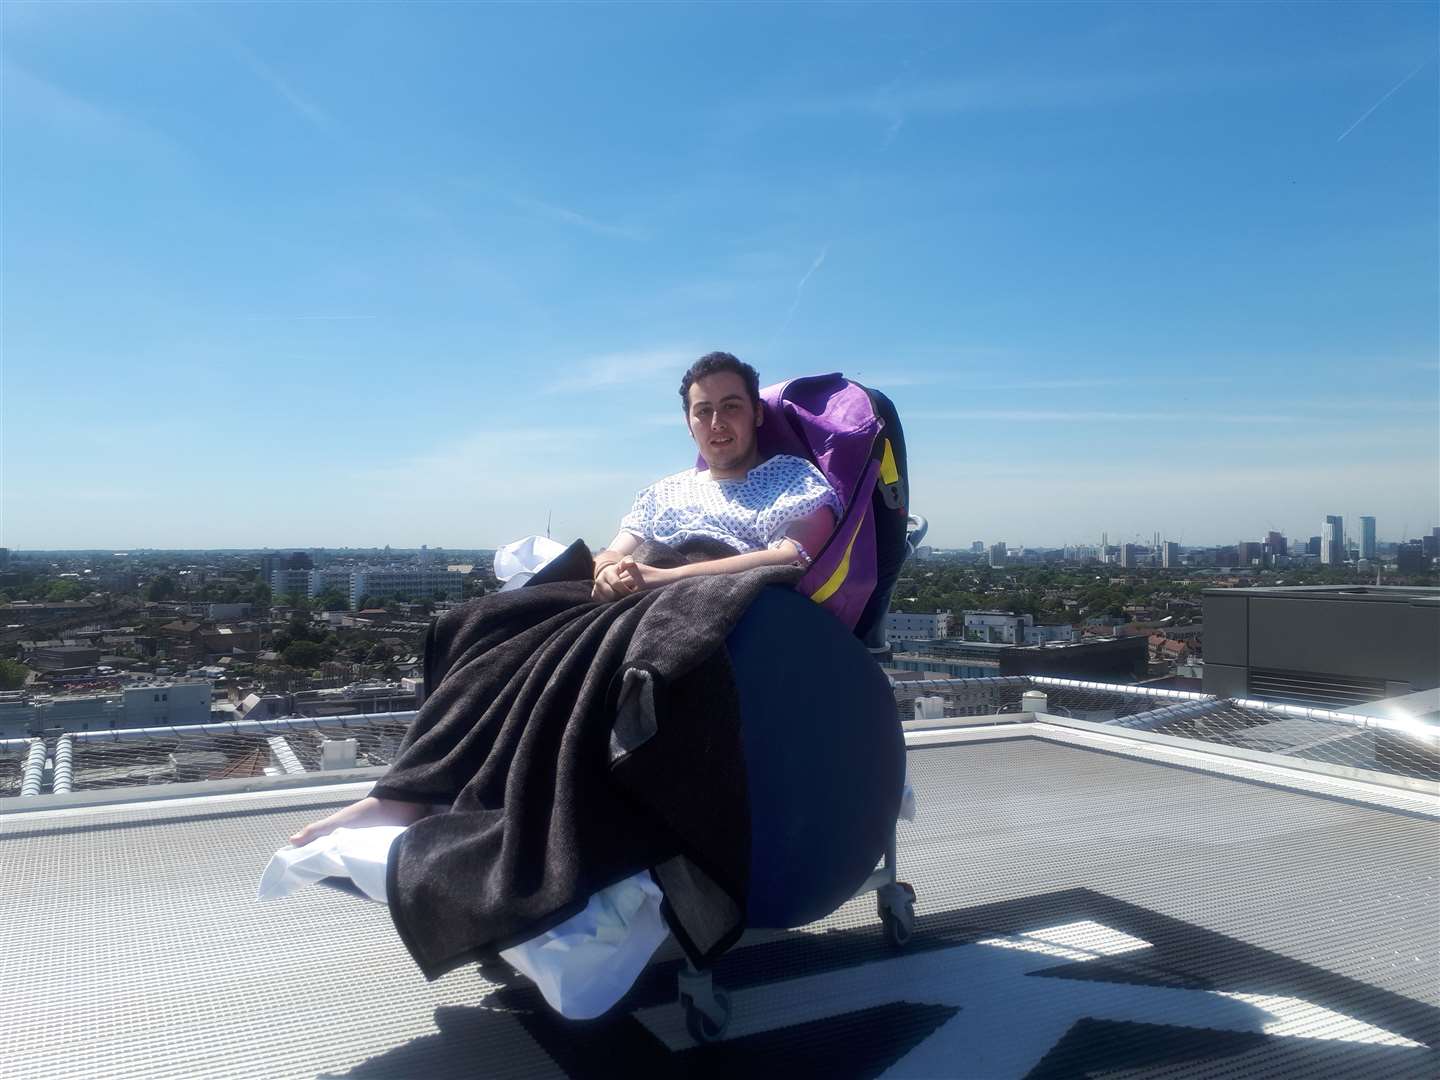 Louis Pilcher enjoys the views from the helipad at King's College Hospital - a special treat